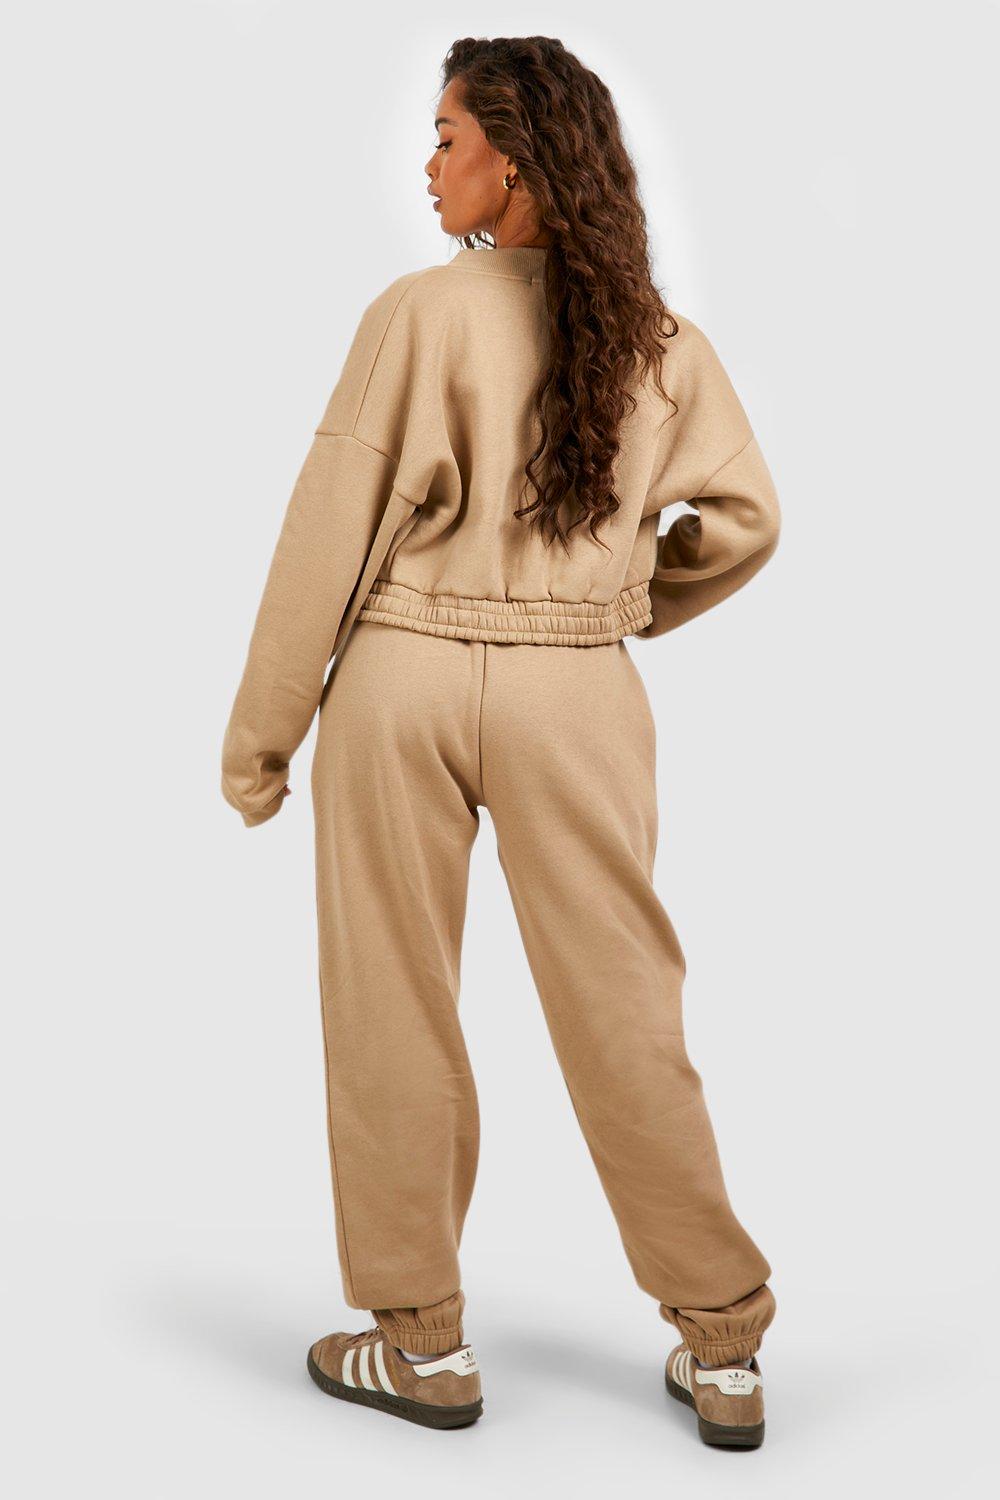 2023 Fall Womens Urban Chic: Hugcitar Long Sleeve Crop Top And Leggings Set  Back Solid Color, Mix For Streetwear And Tracksuit From Lyq669, $22.07